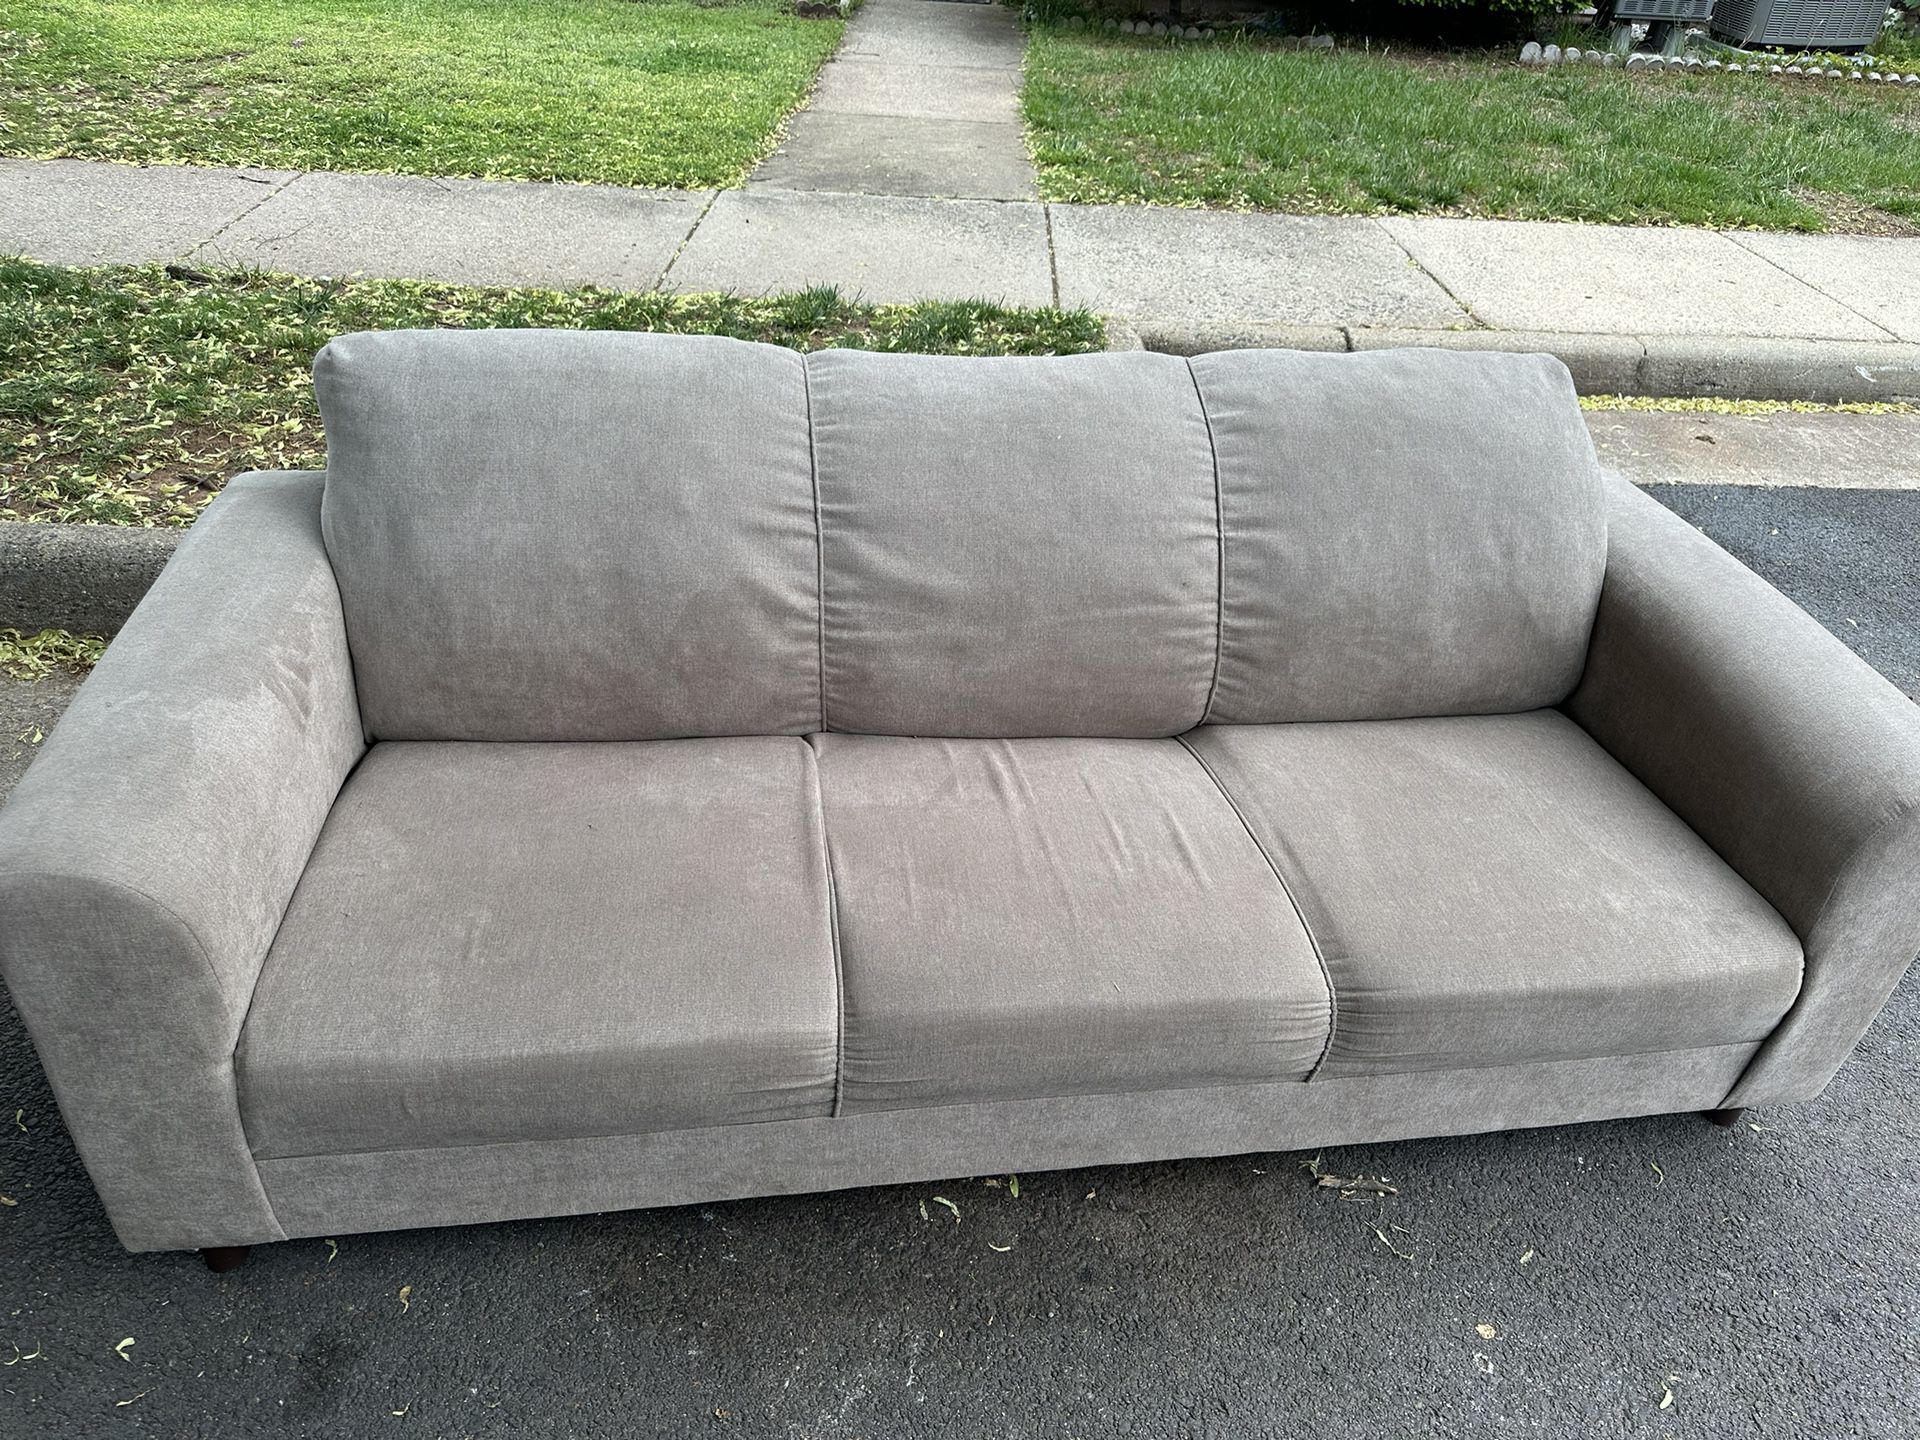 Free Tan Couches With Pillows